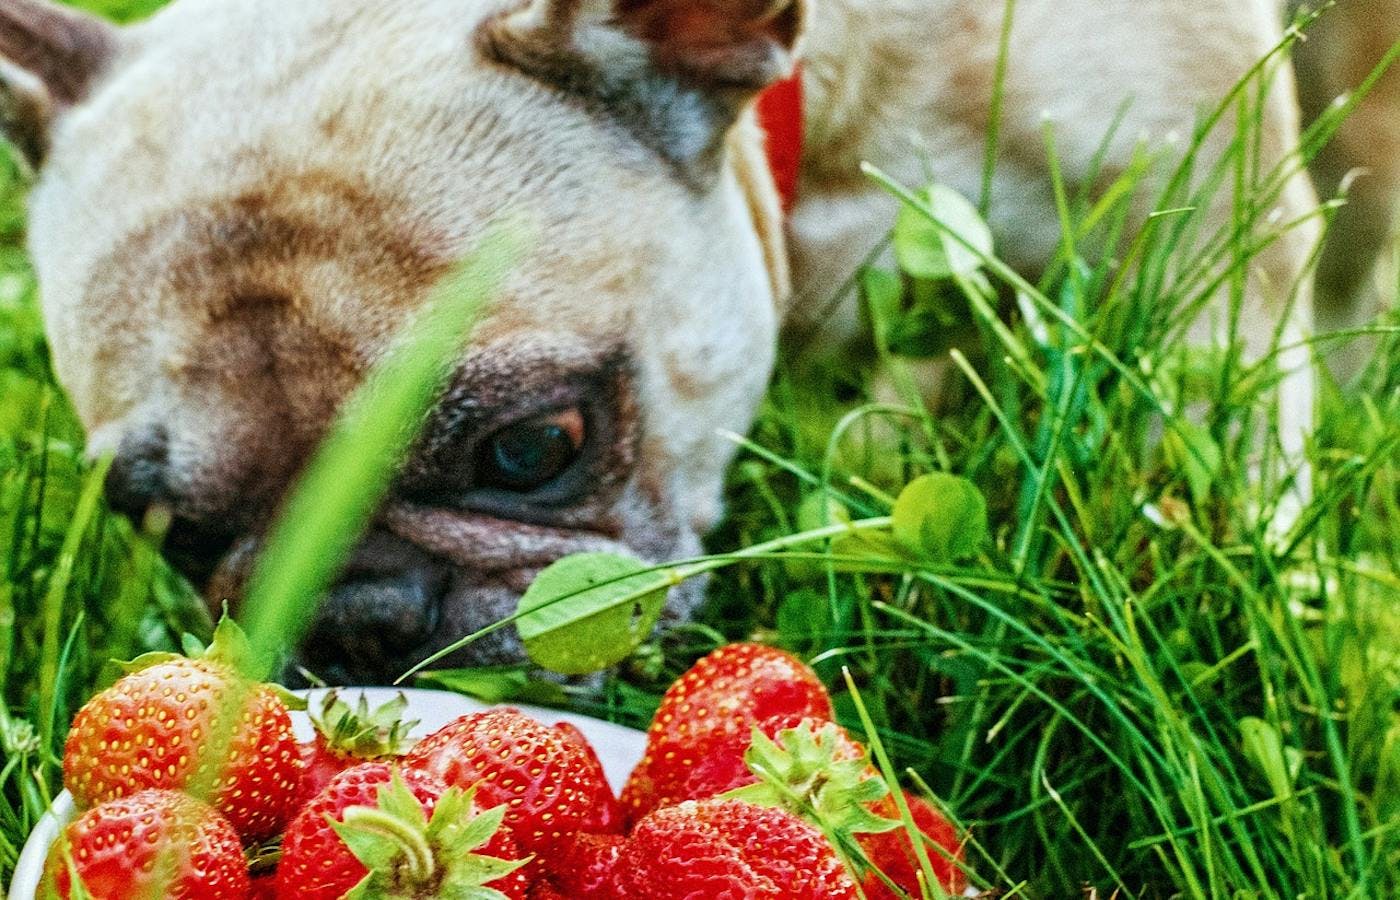 pug tucking into some strawberries 